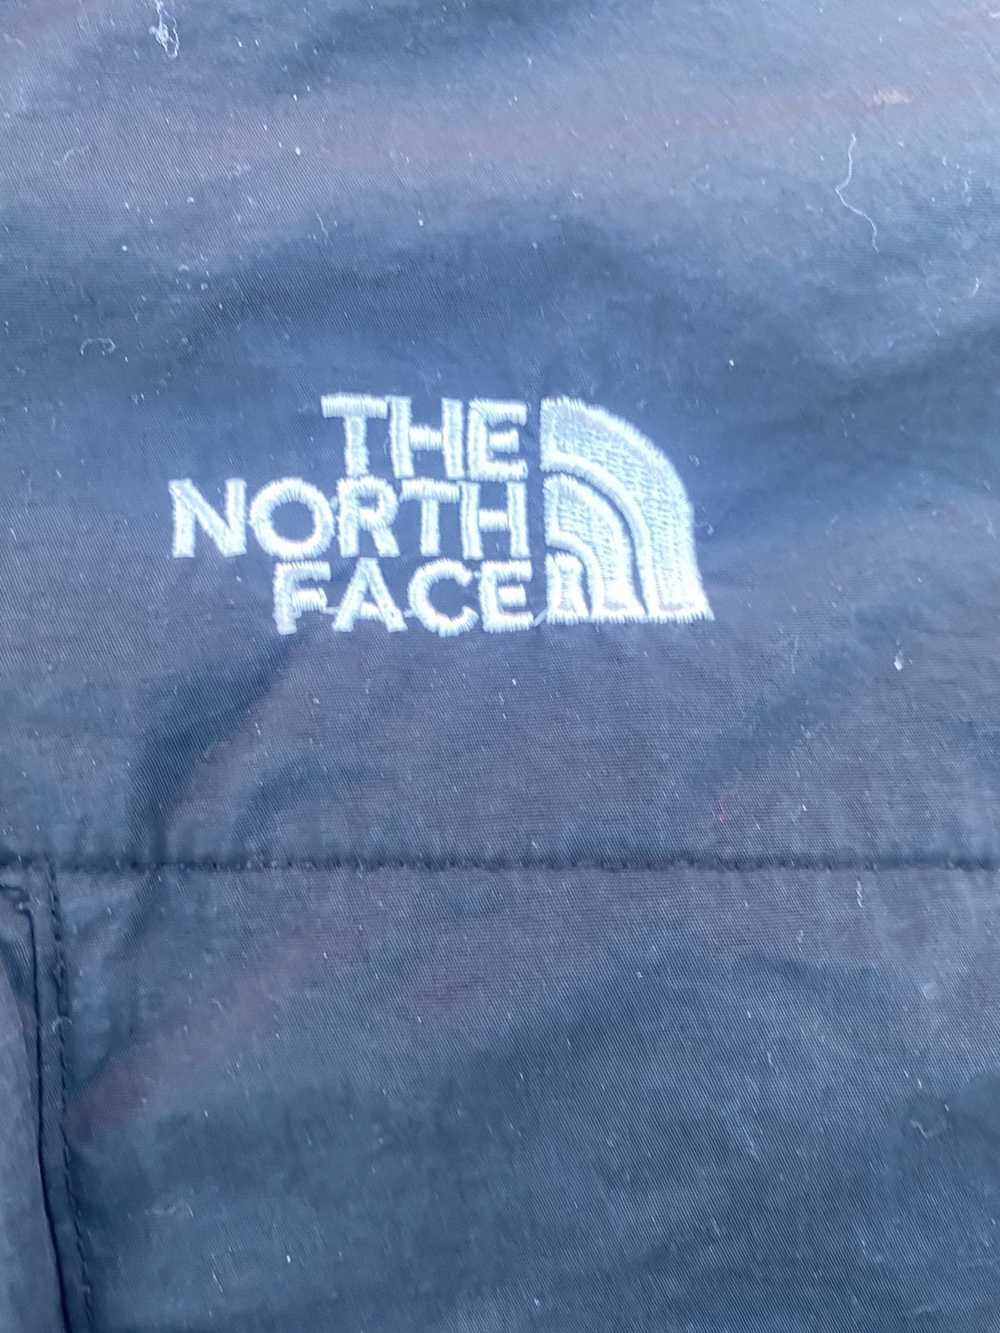 The North Face North face jacket - image 3